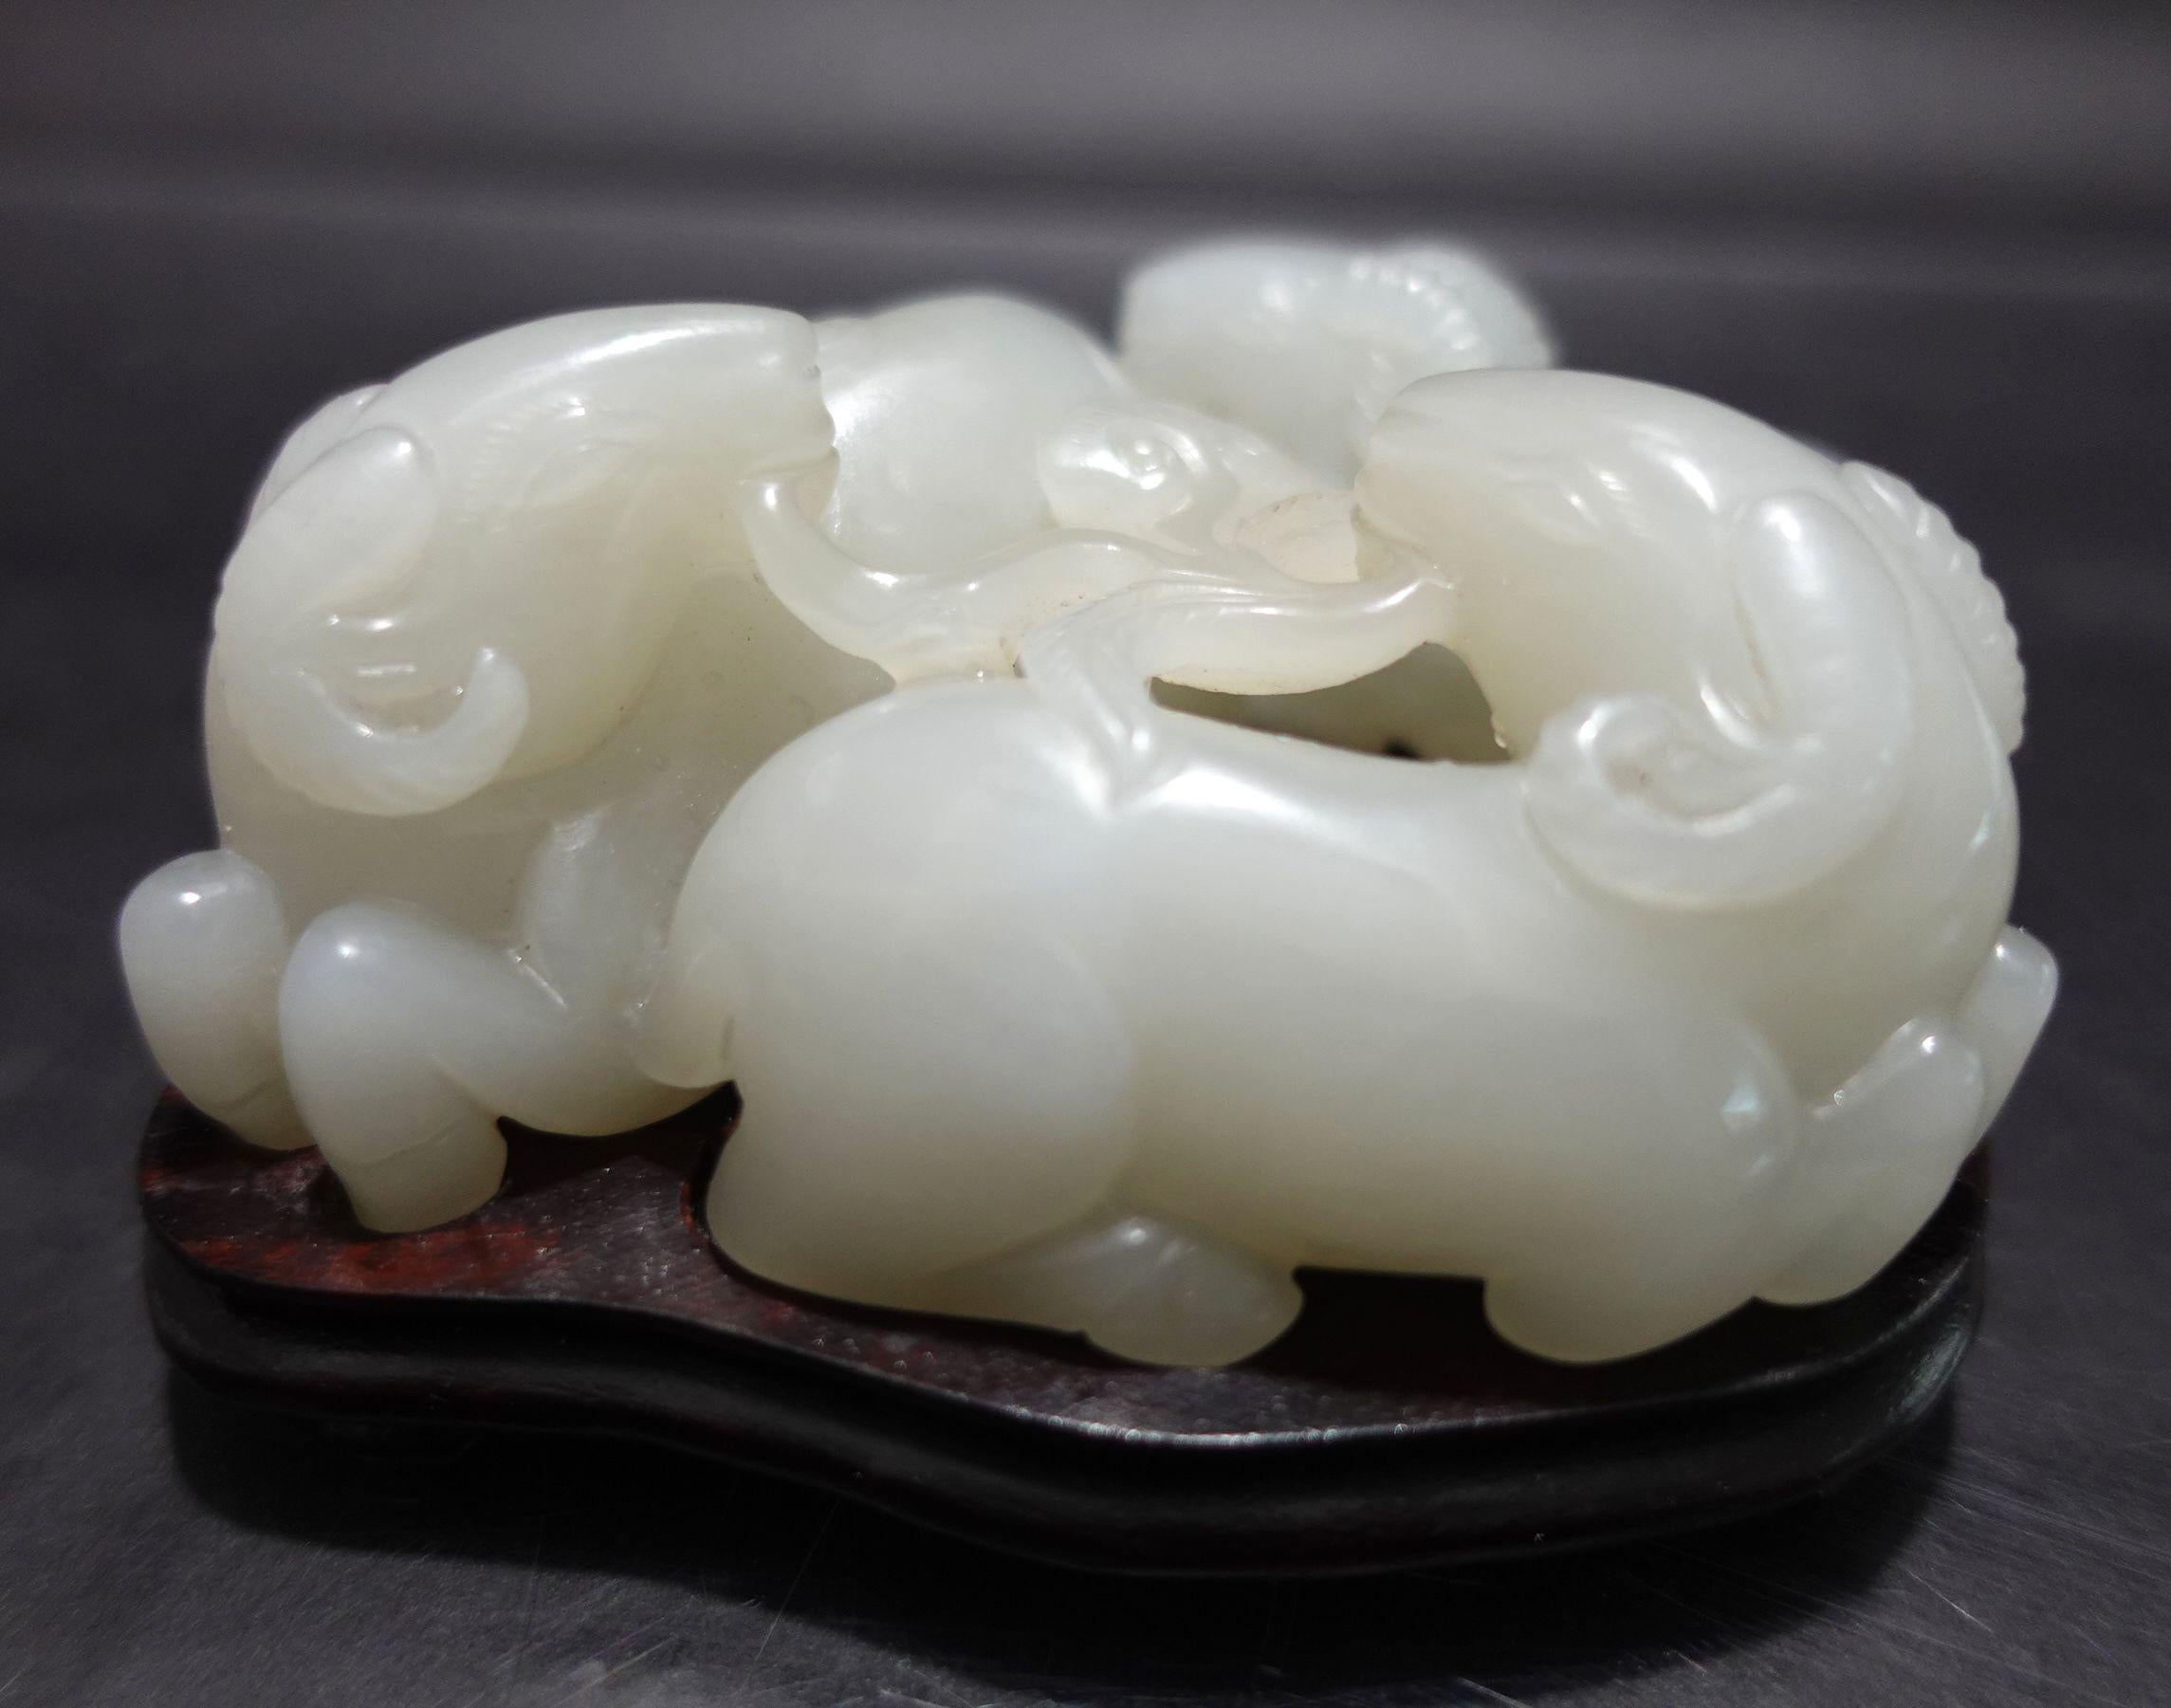 A nice hand-carved antique, a Large and Heavy Chinese Hetain White- Light Gray Jade of 3 Rams resting on the fitted wooden stand., 360° carving. There is a meaning behind this artwork. Three Rams read 